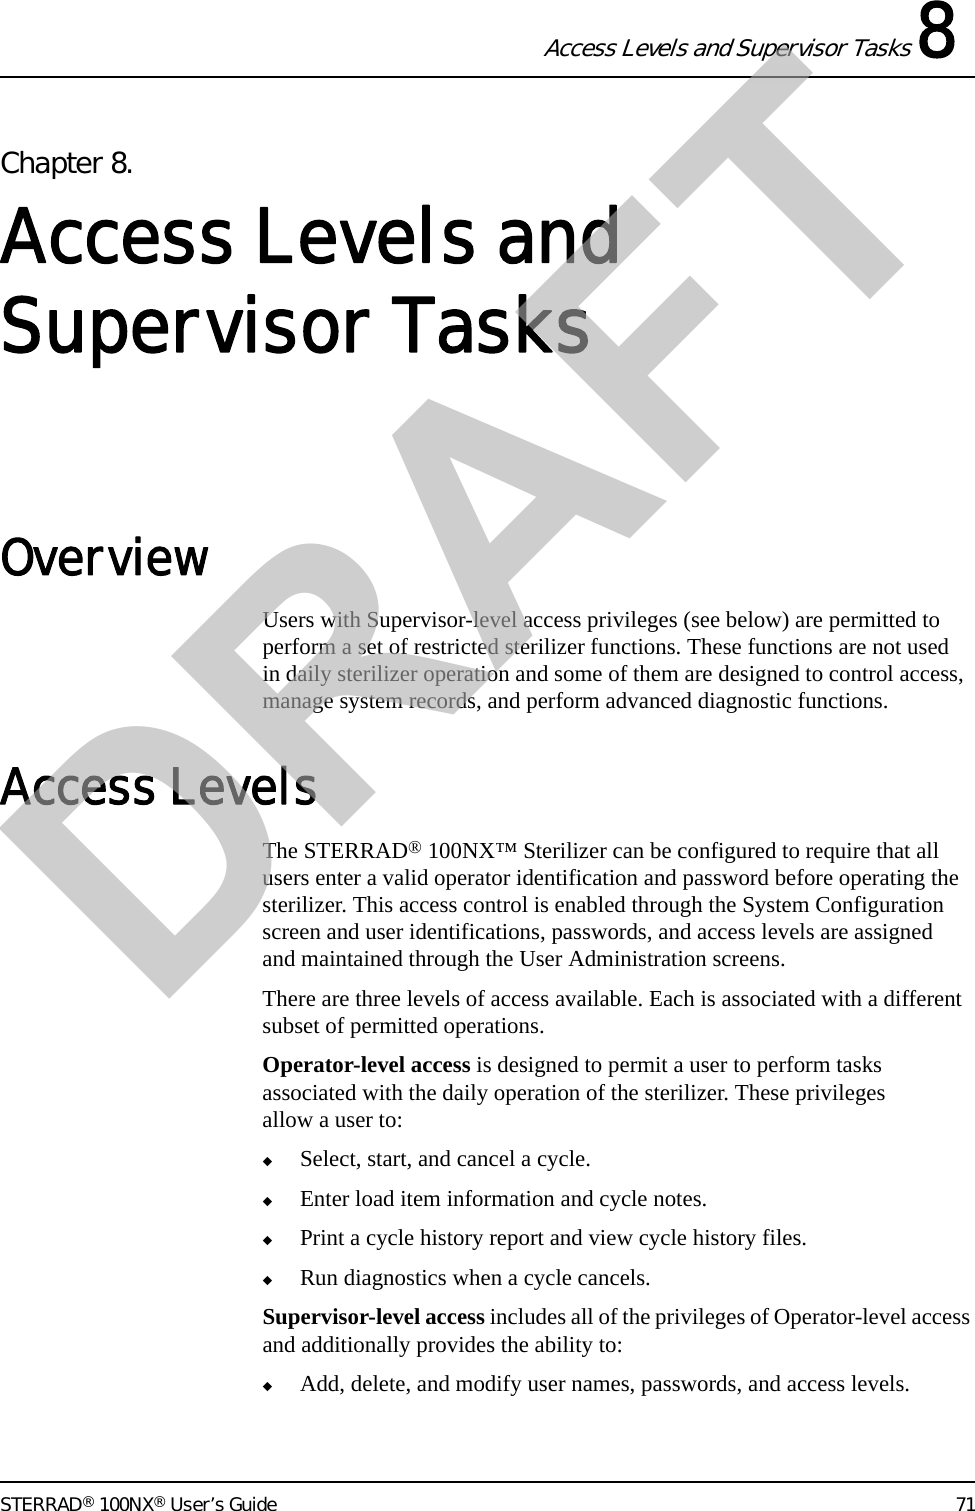 Access Levels and Supervisor Tasks 8STERRAD® 100NX® User’s Guide 71Chapter 8. Access Levels and Supervisor TasksOverviewUsers with Supervisor-level access privileges (see below) are permitted to perform a set of restricted sterilizer functions. These functions are not used in daily sterilizer operation and some of them are designed to control access, manage system records, and perform advanced diagnostic functions.Access LevelsThe STERRAD® 100NX™ Sterilizer can be configured to require that all users enter a valid operator identification and password before operating the sterilizer. This access control is enabled through the System Configuration screen and user identifications, passwords, and access levels are assigned and maintained through the User Administration screens.There are three levels of access available. Each is associated with a different subset of permitted operations.Operator-level access is designed to permit a user to perform tasks associated with the daily operation of the sterilizer. These privileges allow a user to:◆Select, start, and cancel a cycle.◆Enter load item information and cycle notes.◆Print a cycle history report and view cycle history files.◆Run diagnostics when a cycle cancels.Supervisor-level access includes all of the privileges of Operator-level access and additionally provides the ability to:◆Add, delete, and modify user names, passwords, and access levels.DRAFT